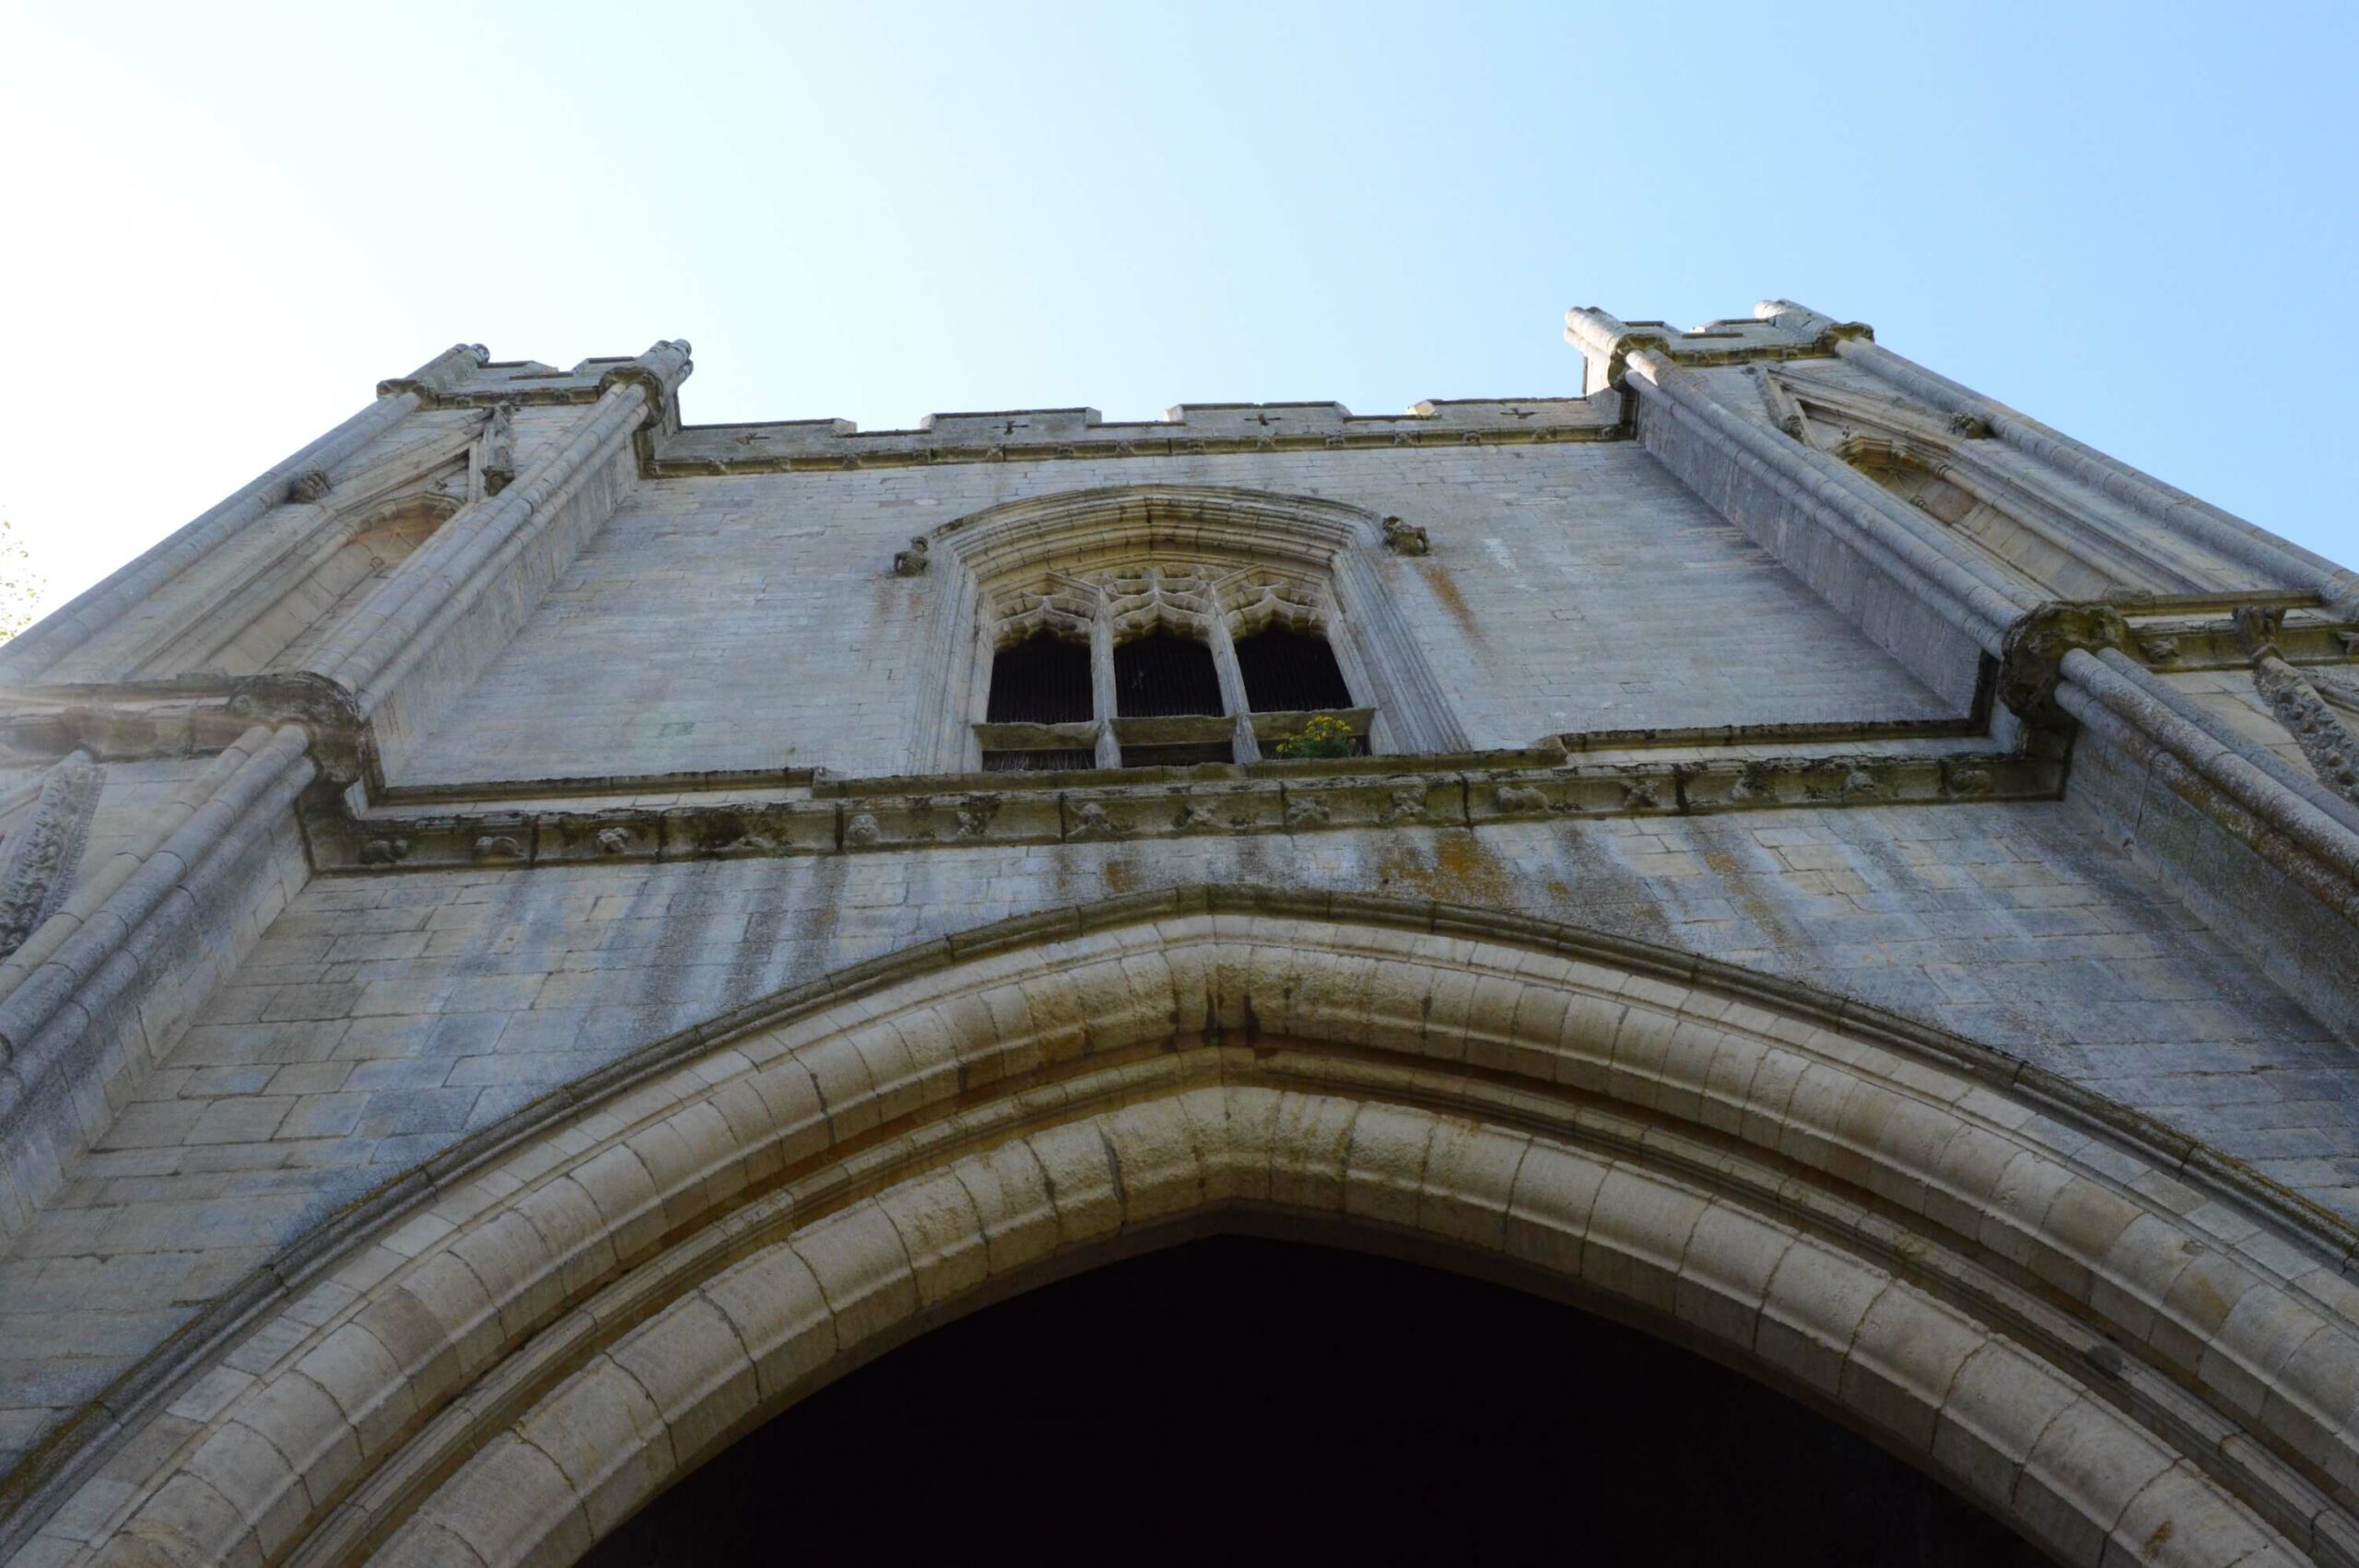 Close up shot of the Abbeygate in Bury St Edmunds, Suffolk